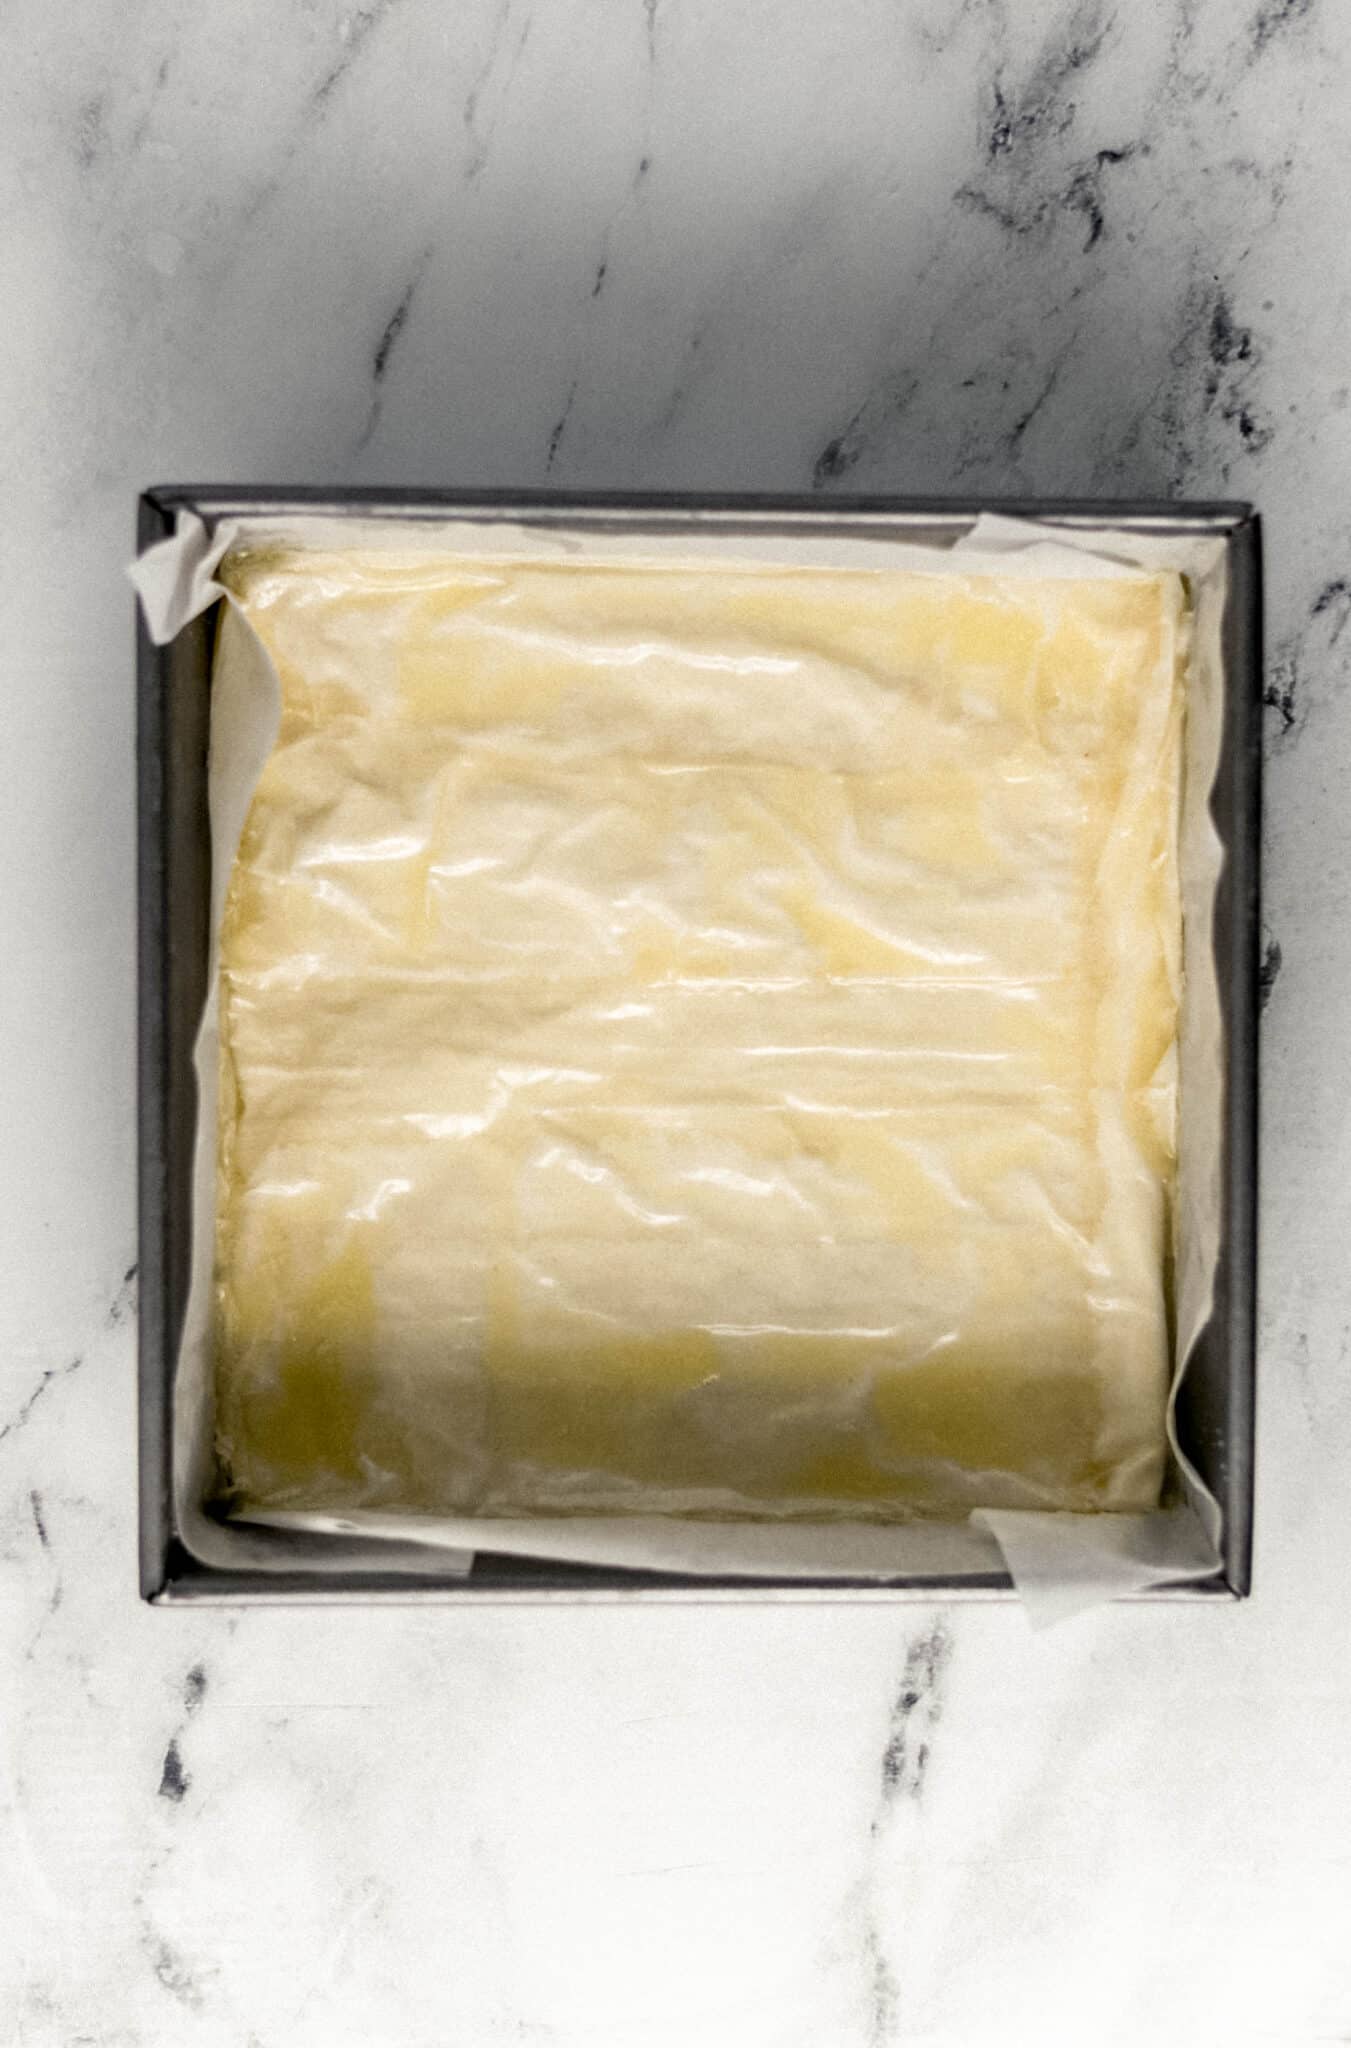 phyllo dough layered with melted butter in parchment lined square baking pan